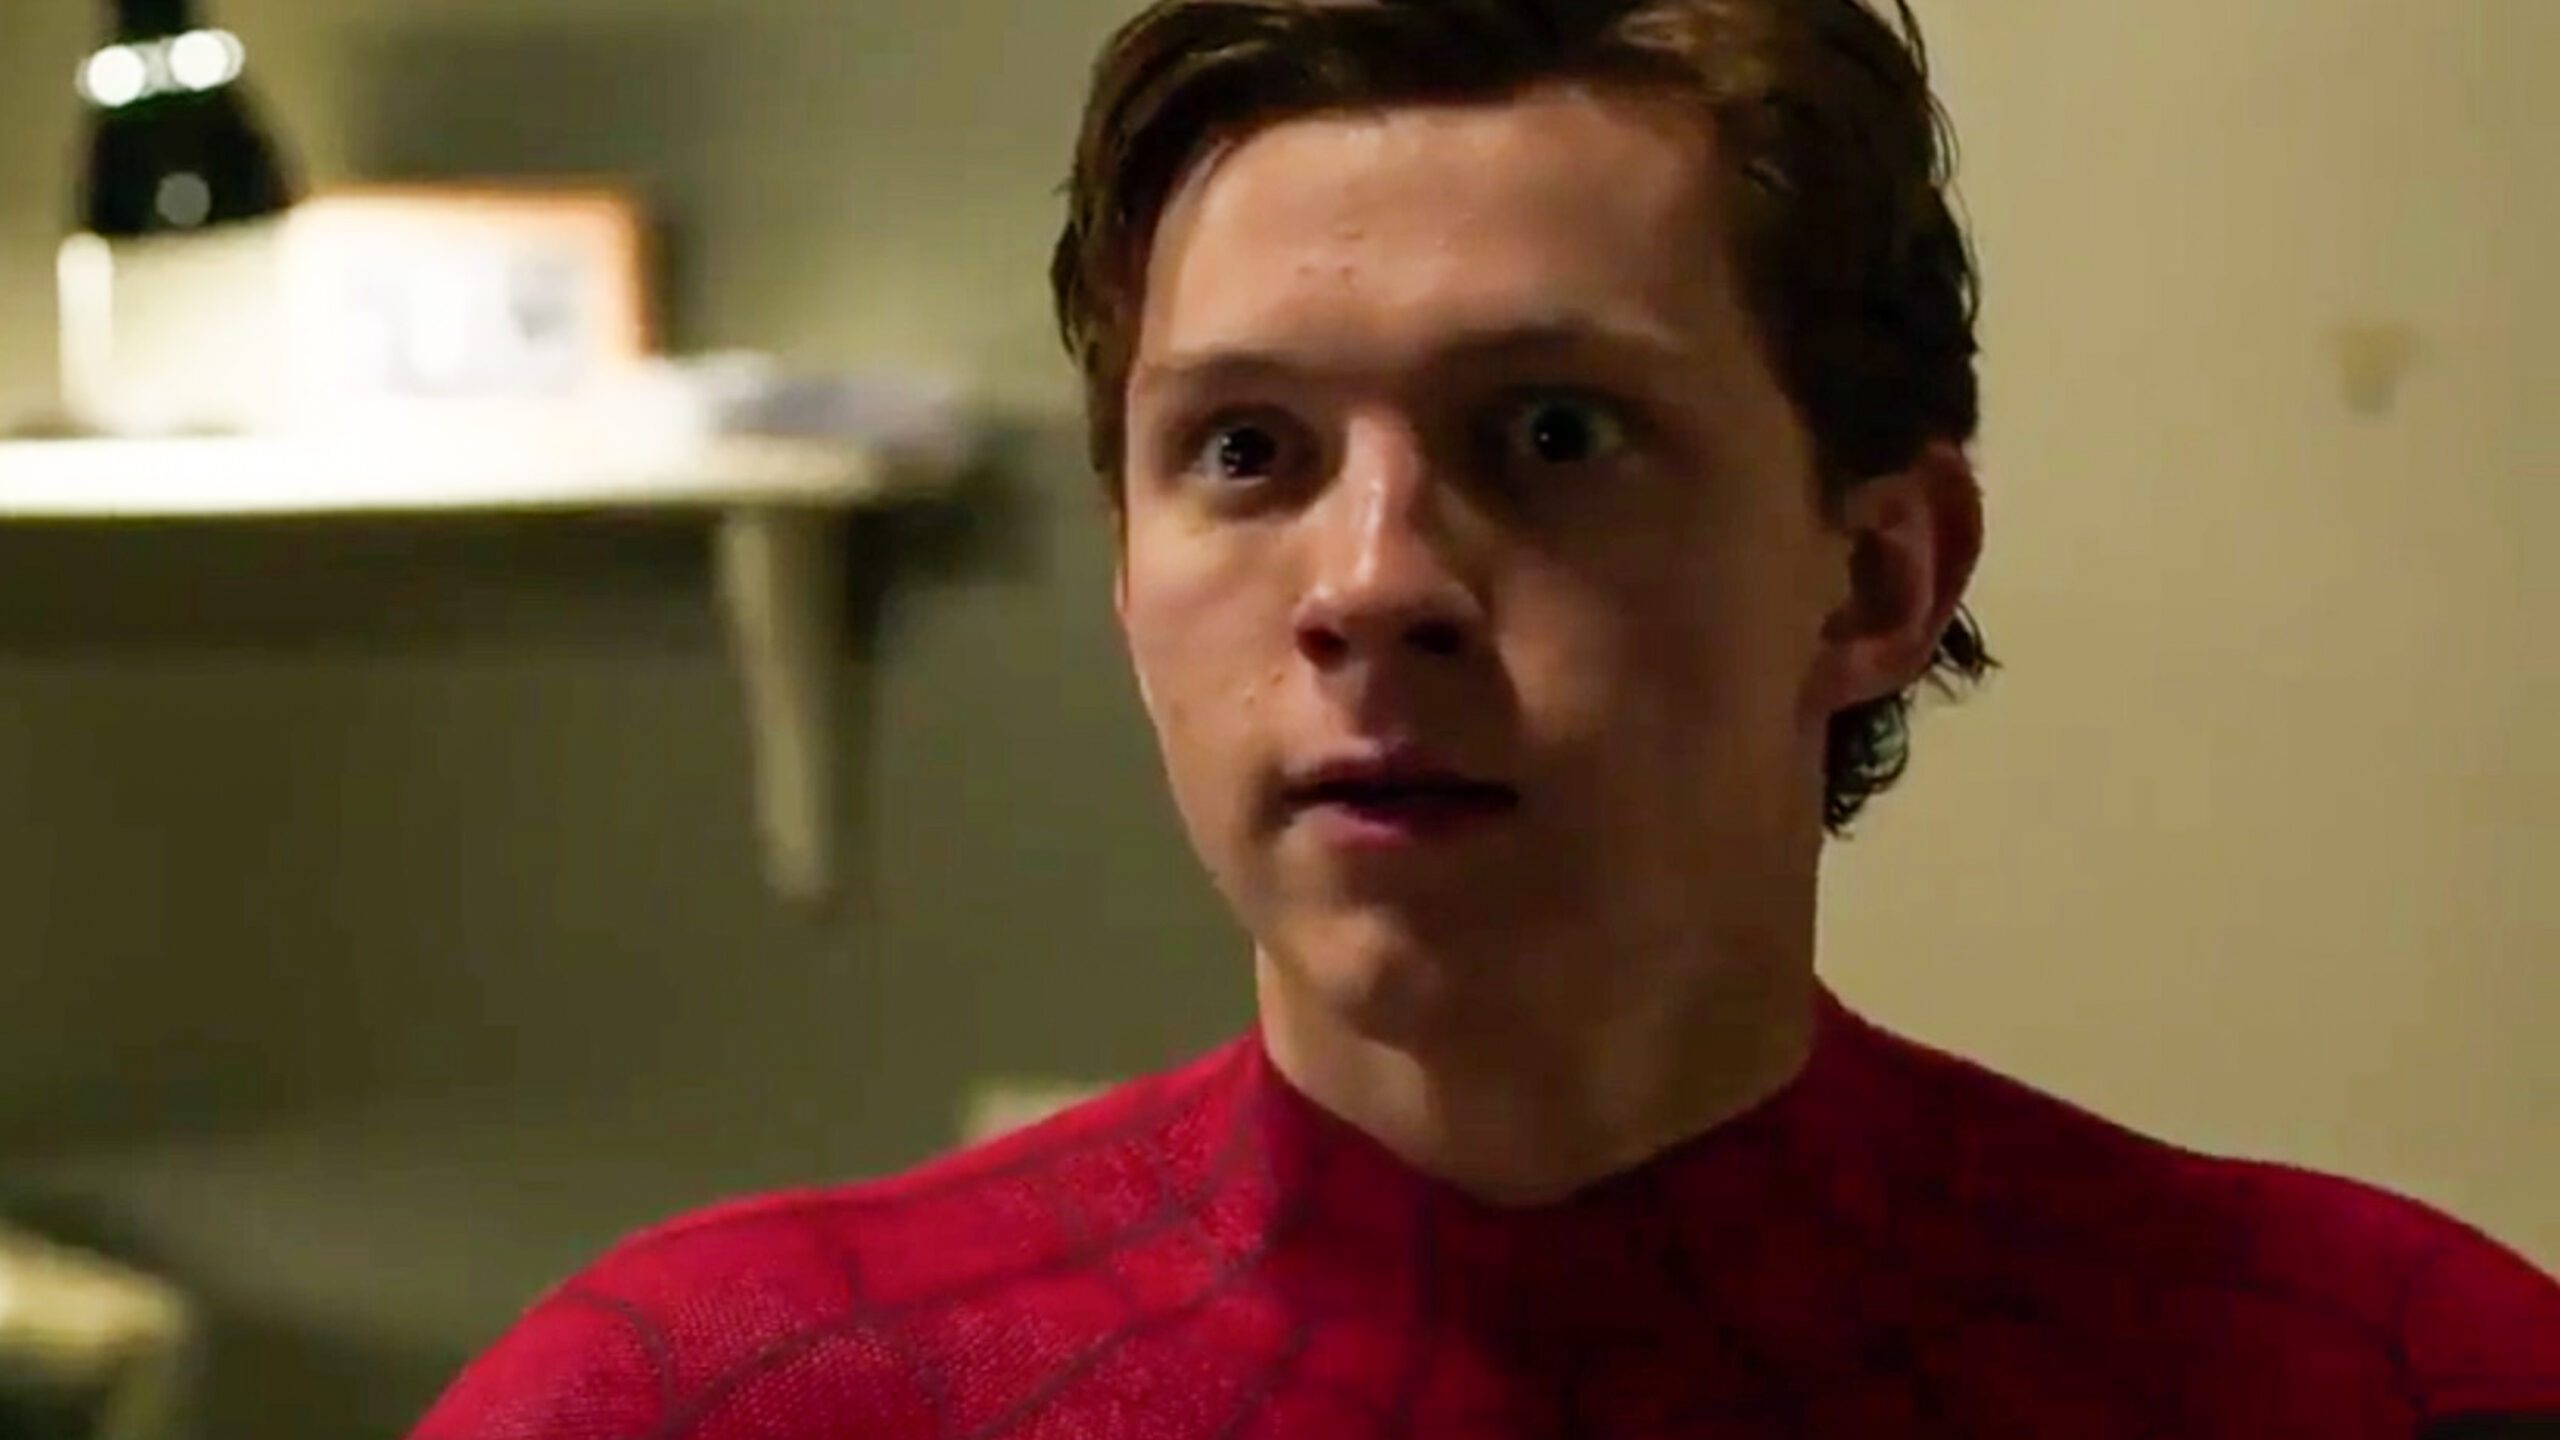 WATCH: New ‘Spider-Man: Homecoming’ clip released